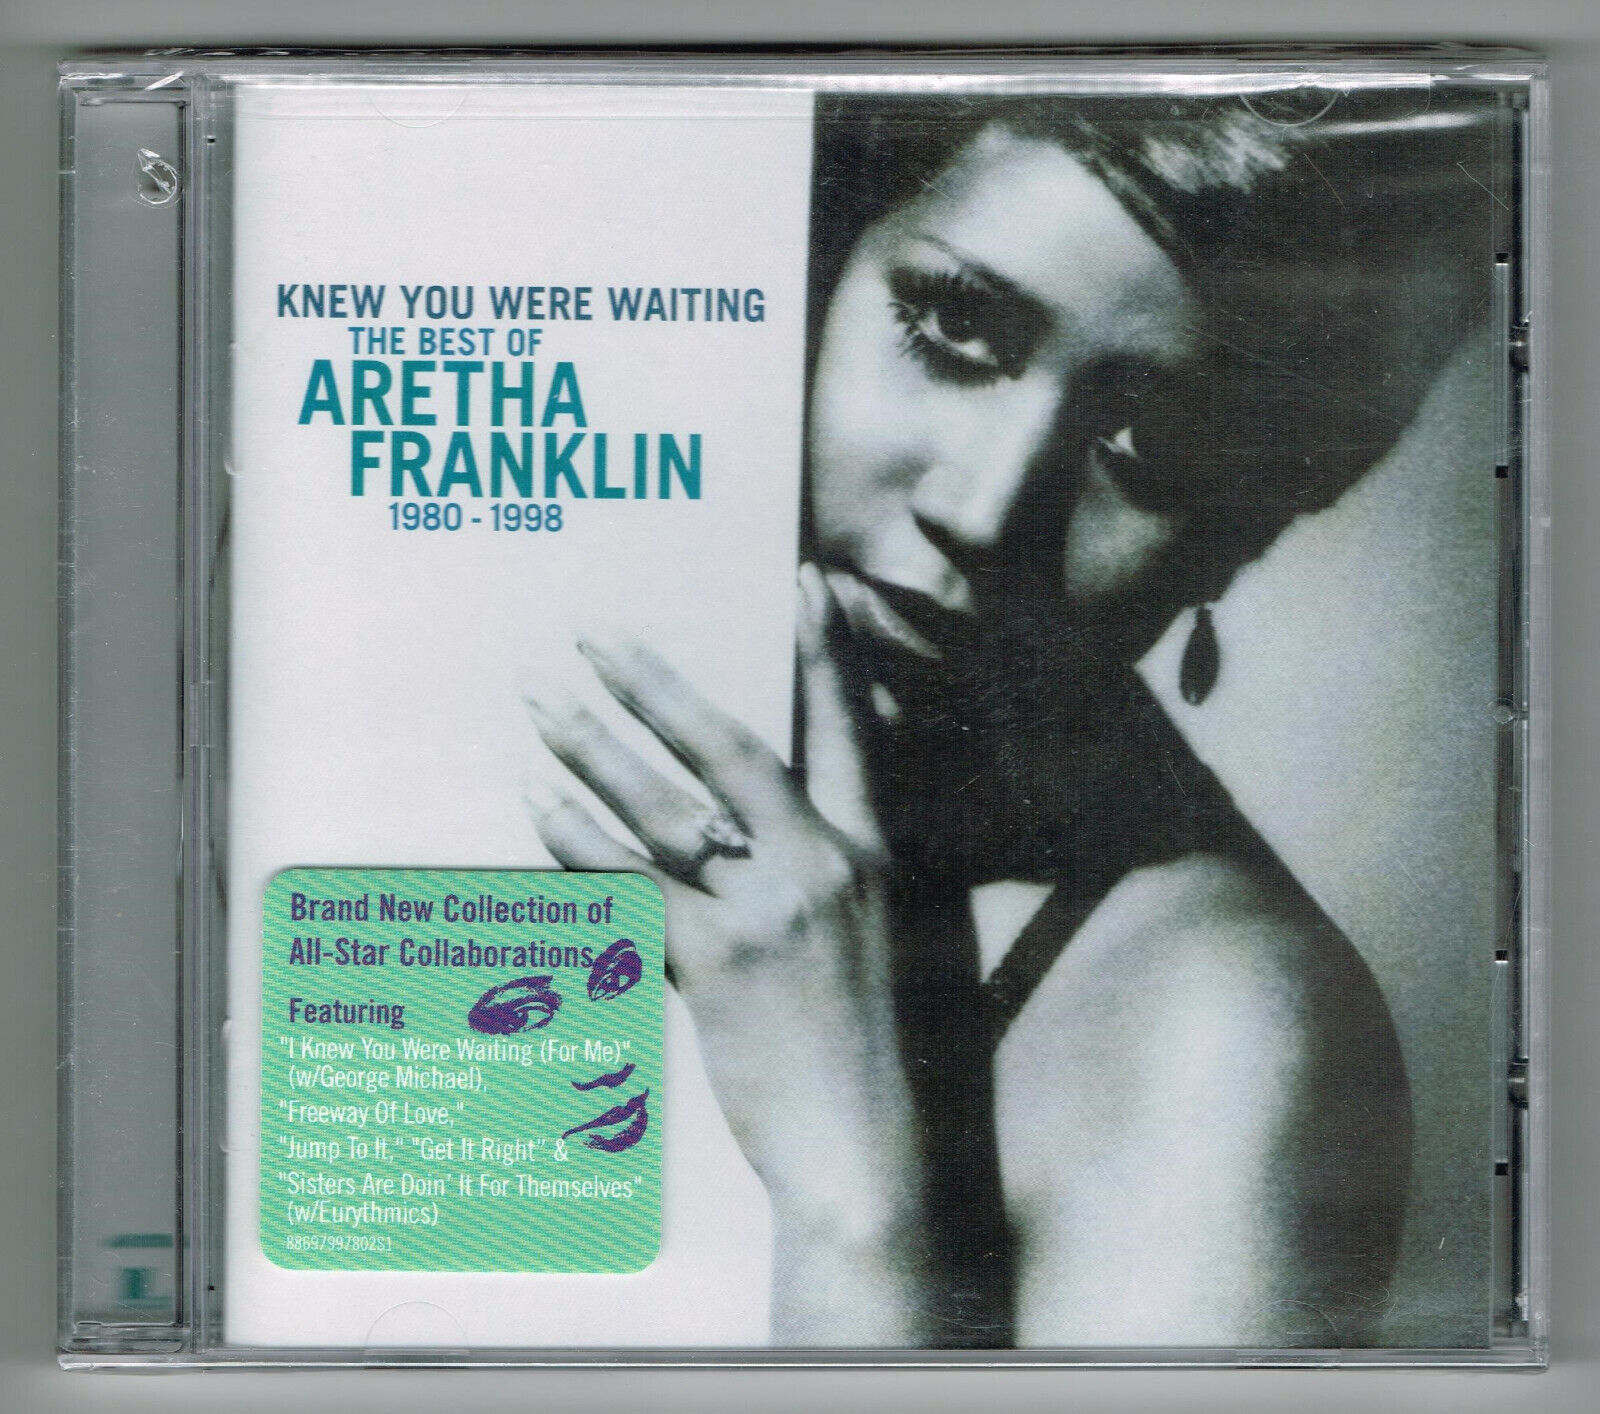 ARETHA FRANKLIN "Knew You Were Waiting Best 1980 - 1998" brand new sealed CD 